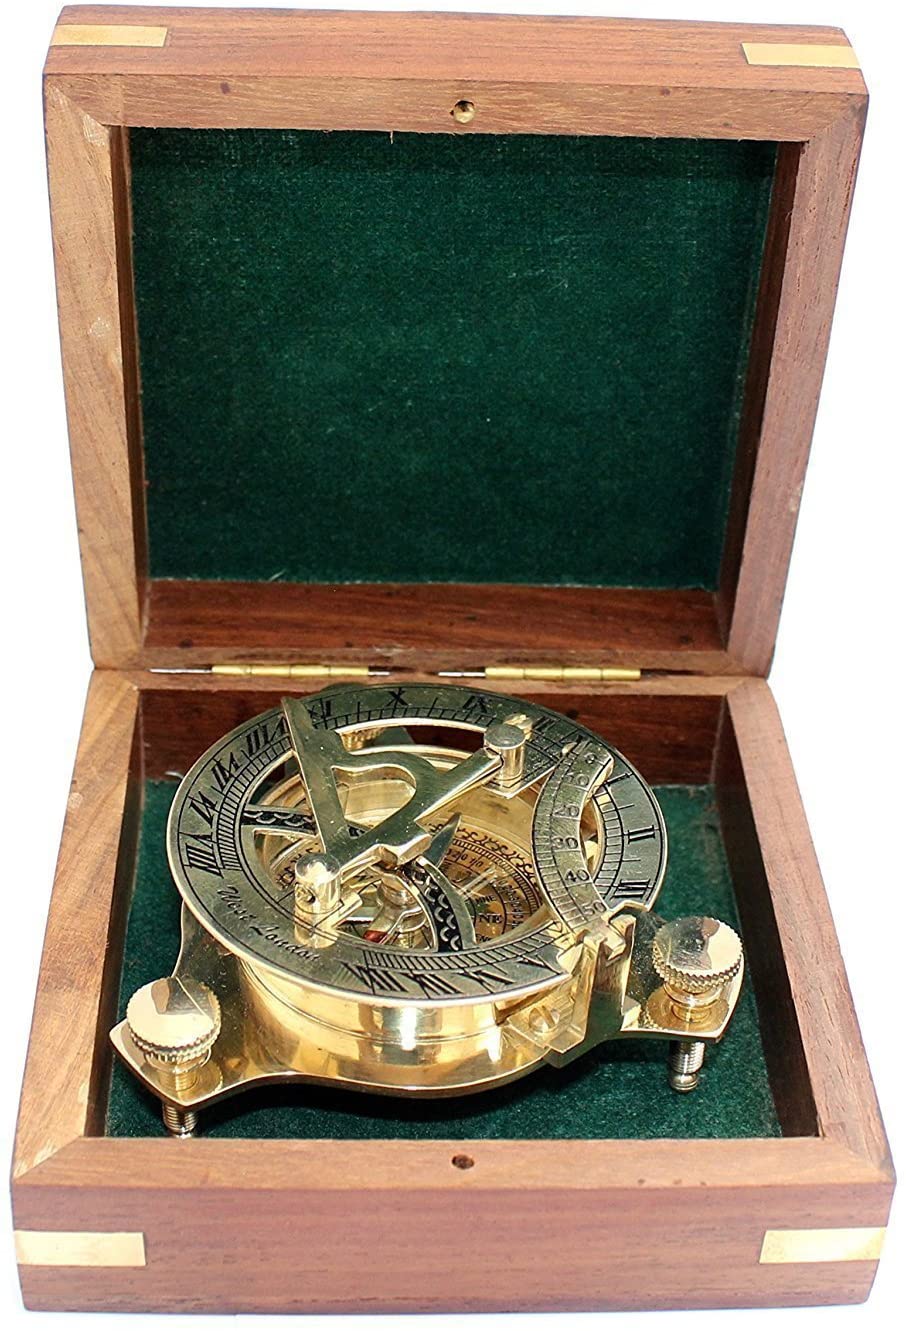 ANTIQUECOLLECTION 4 Nautical West London Sundial Compass With HandCrafted Wooden box 